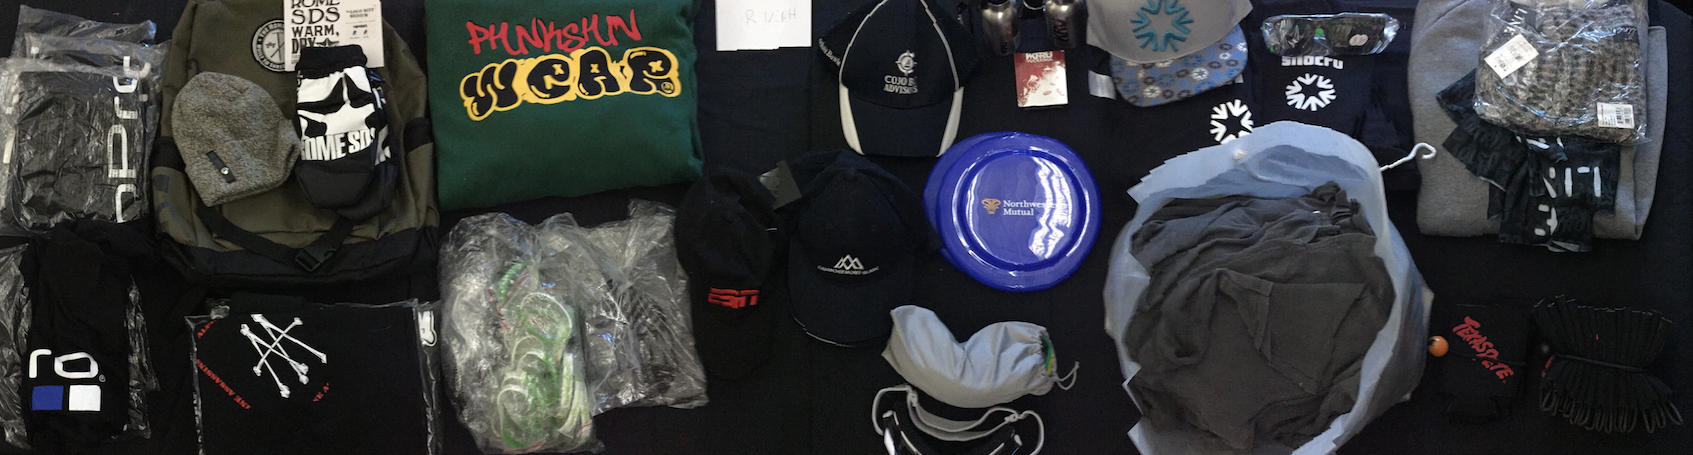 Some of the AMAZING prizes we are giving away!